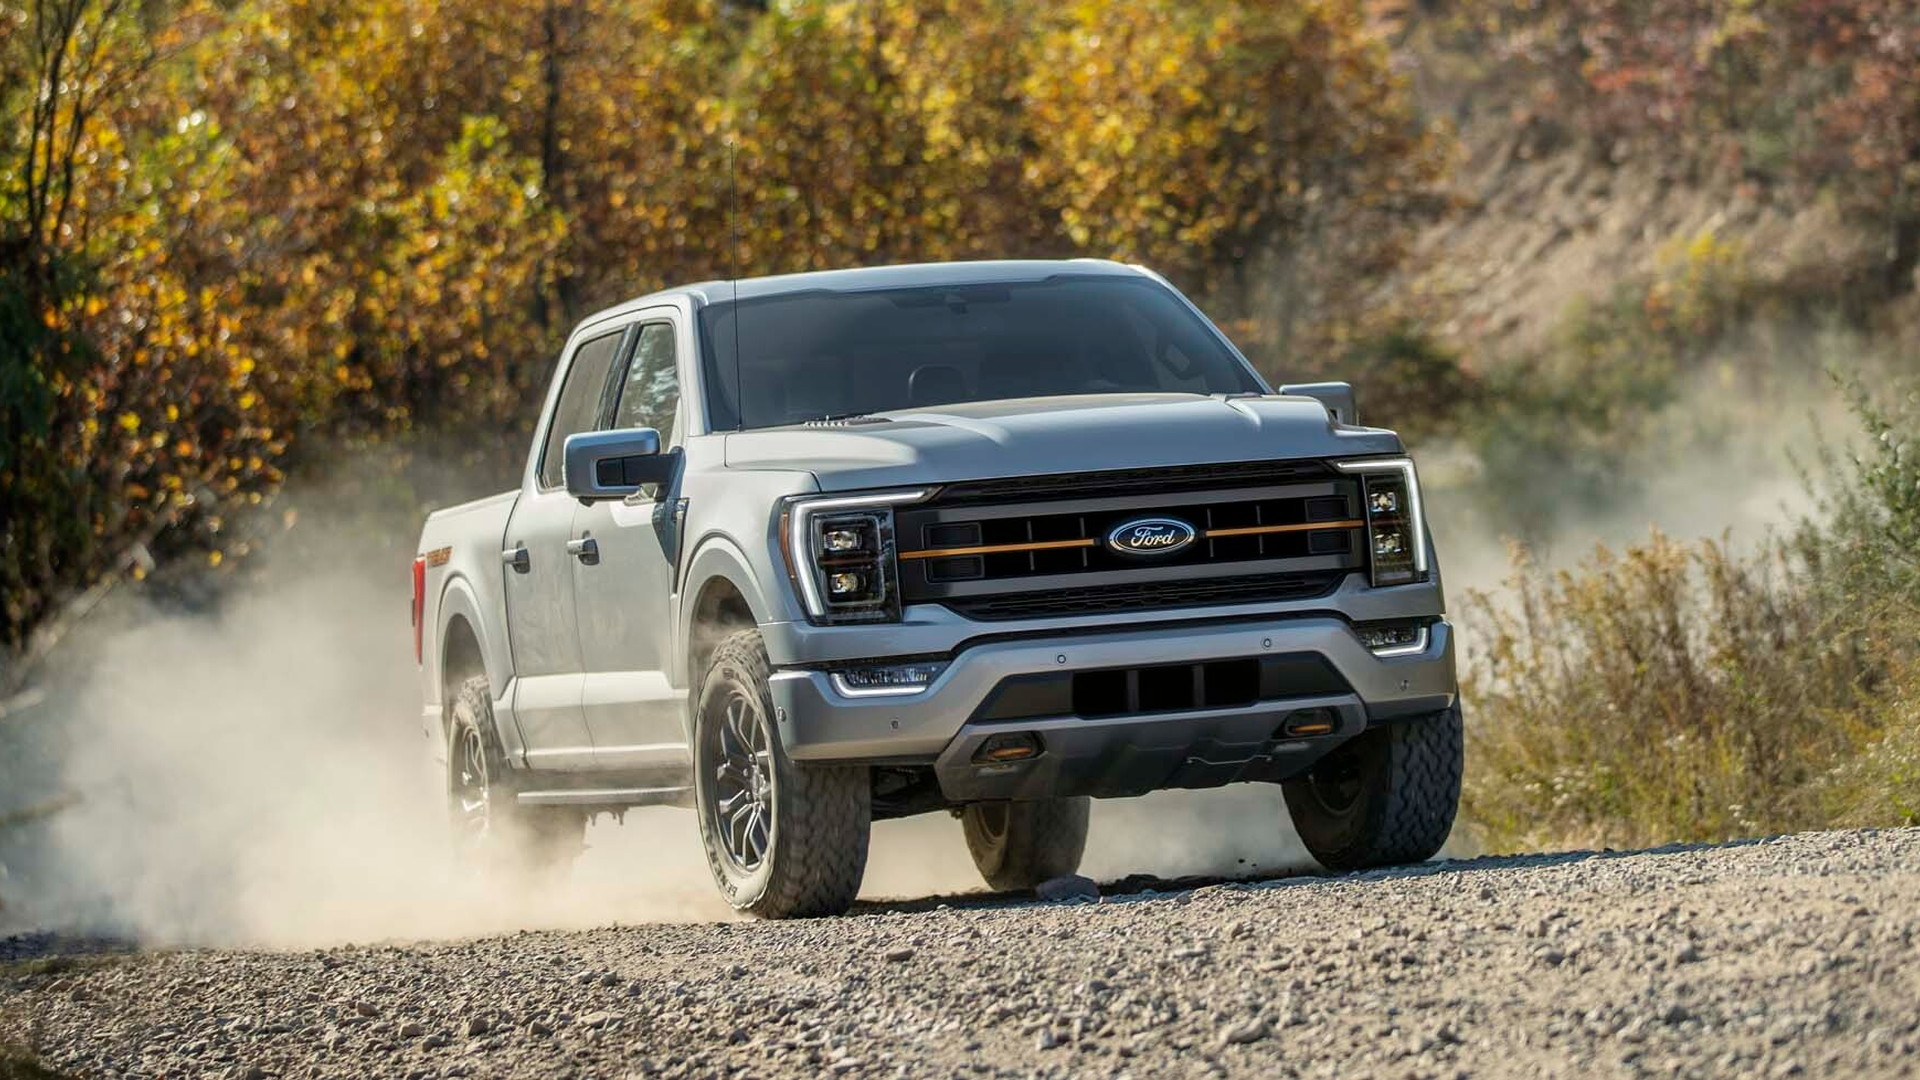 2021 Ford F-150 gets off-road ready with Tremor package